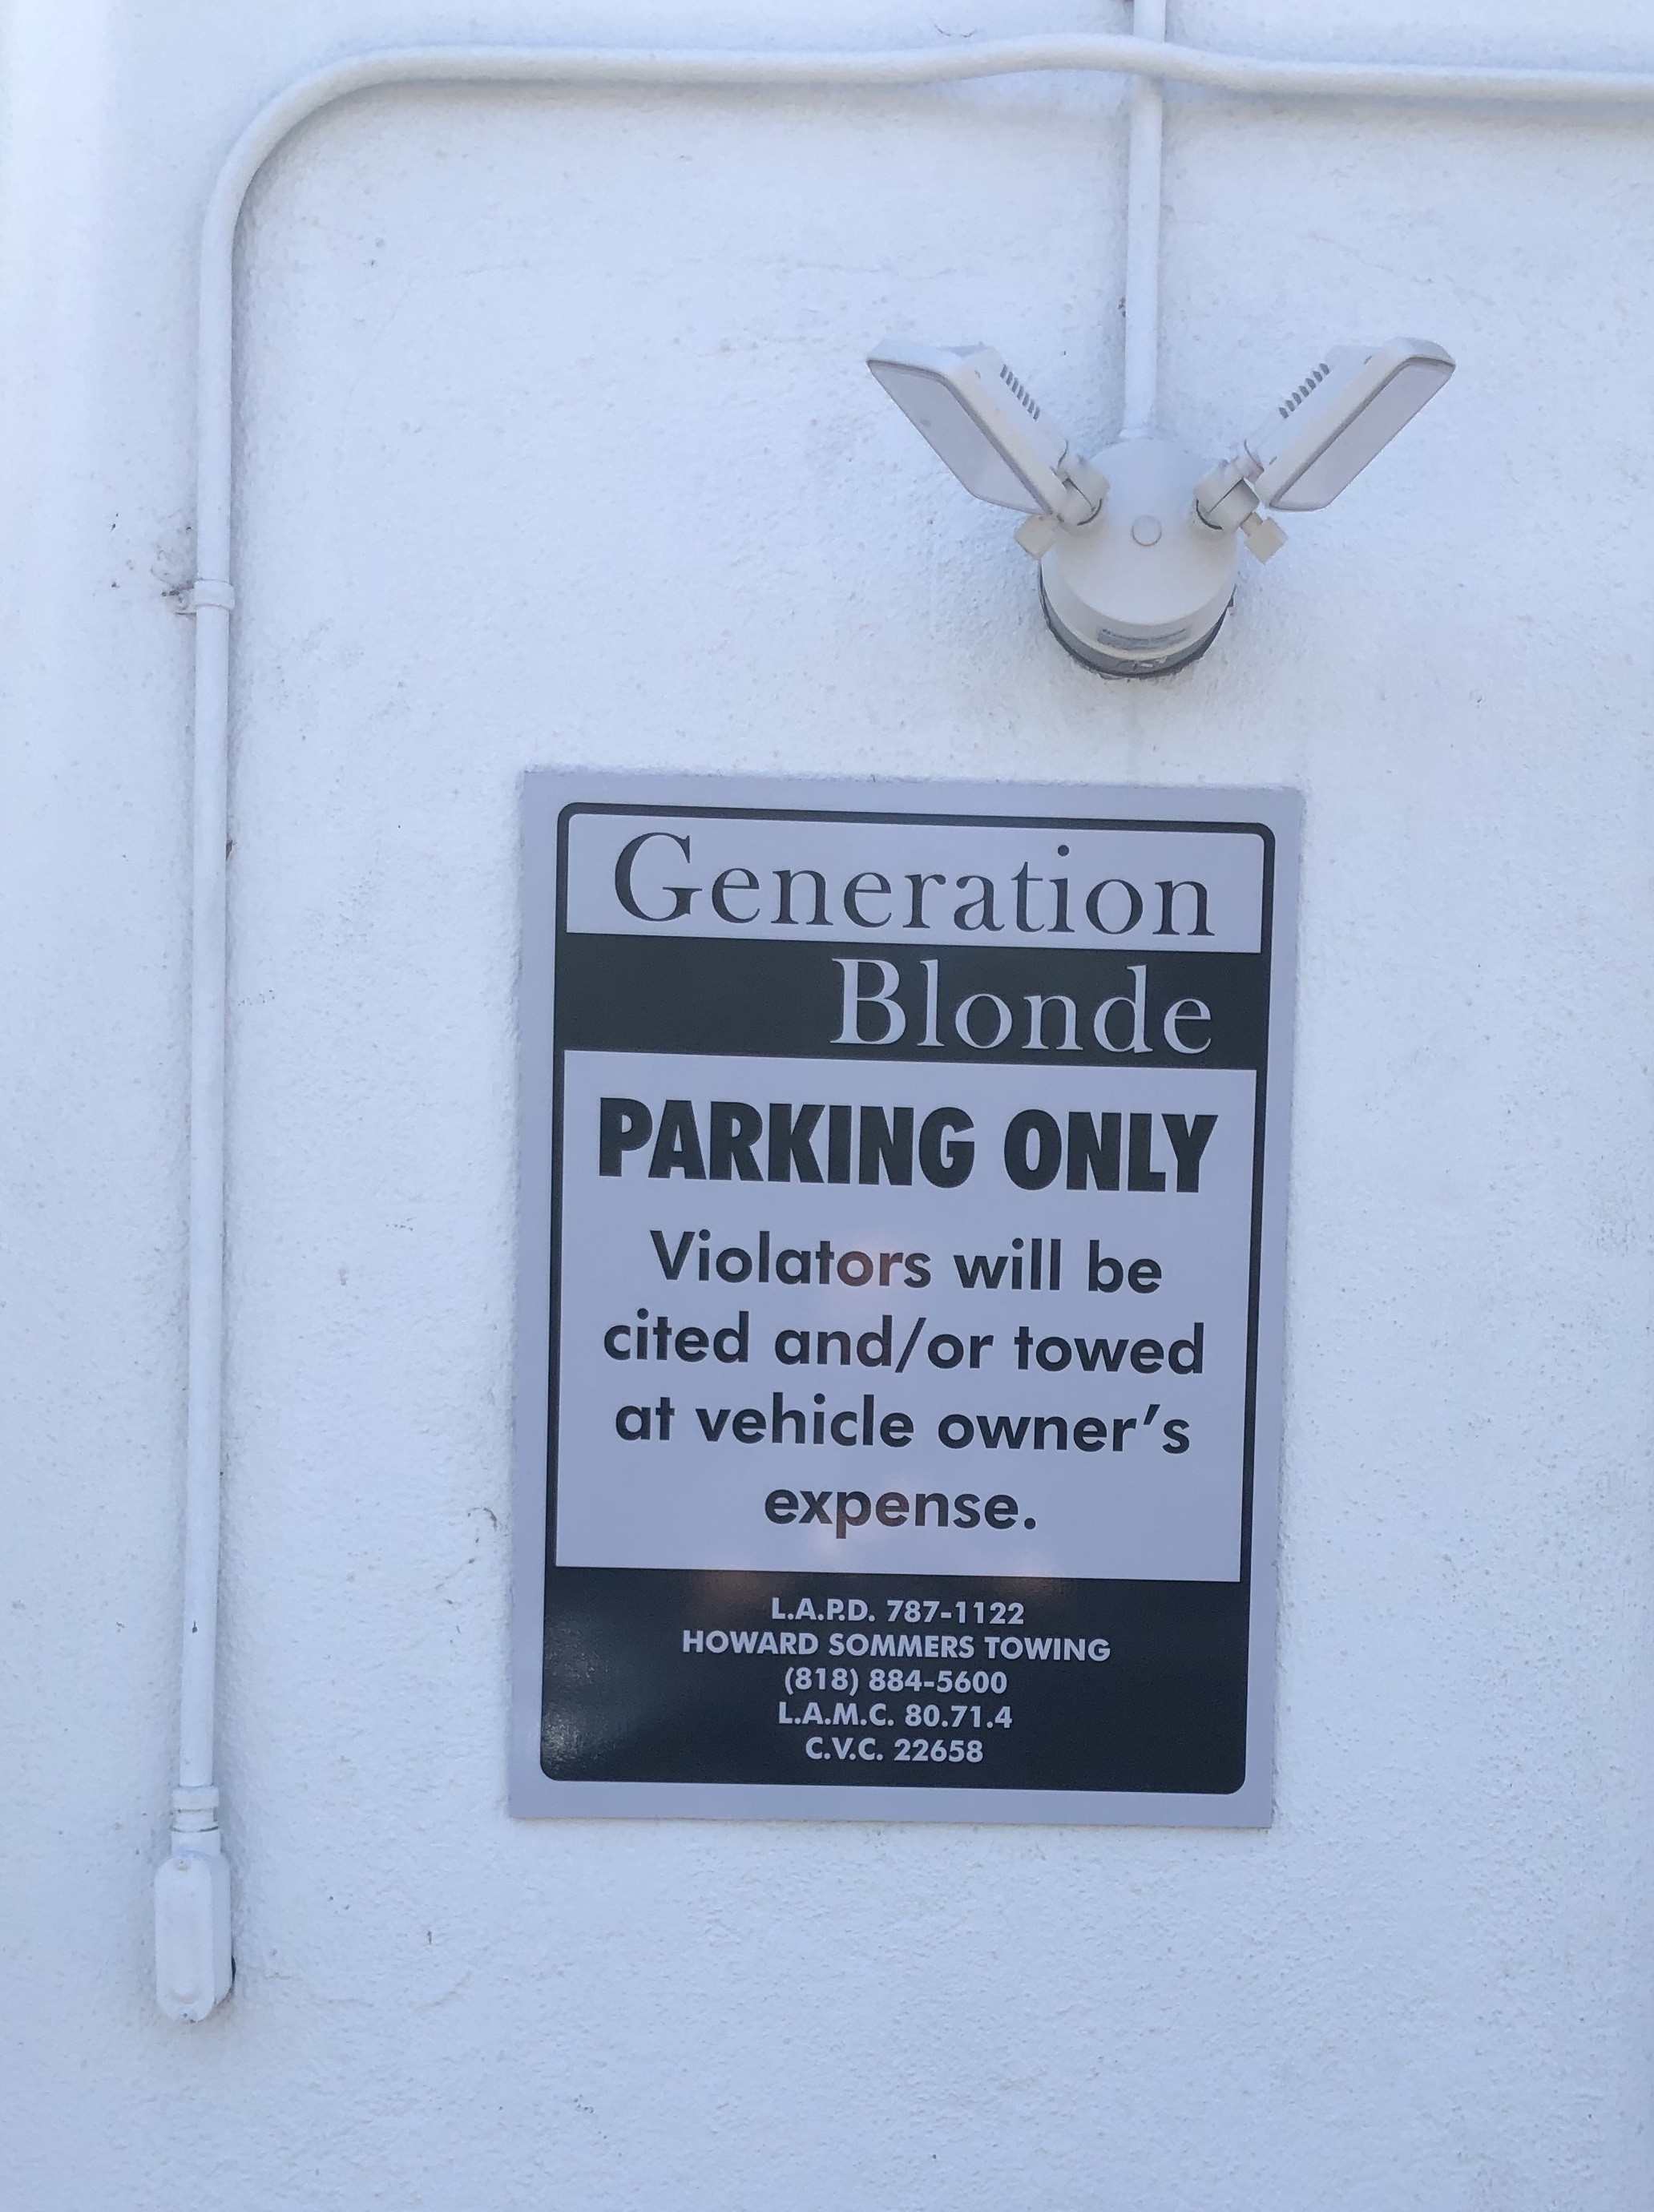 Oarking lot signs we made for Generation Blonde. With these the Woodland Hills business will make the parking process much easier for customers.